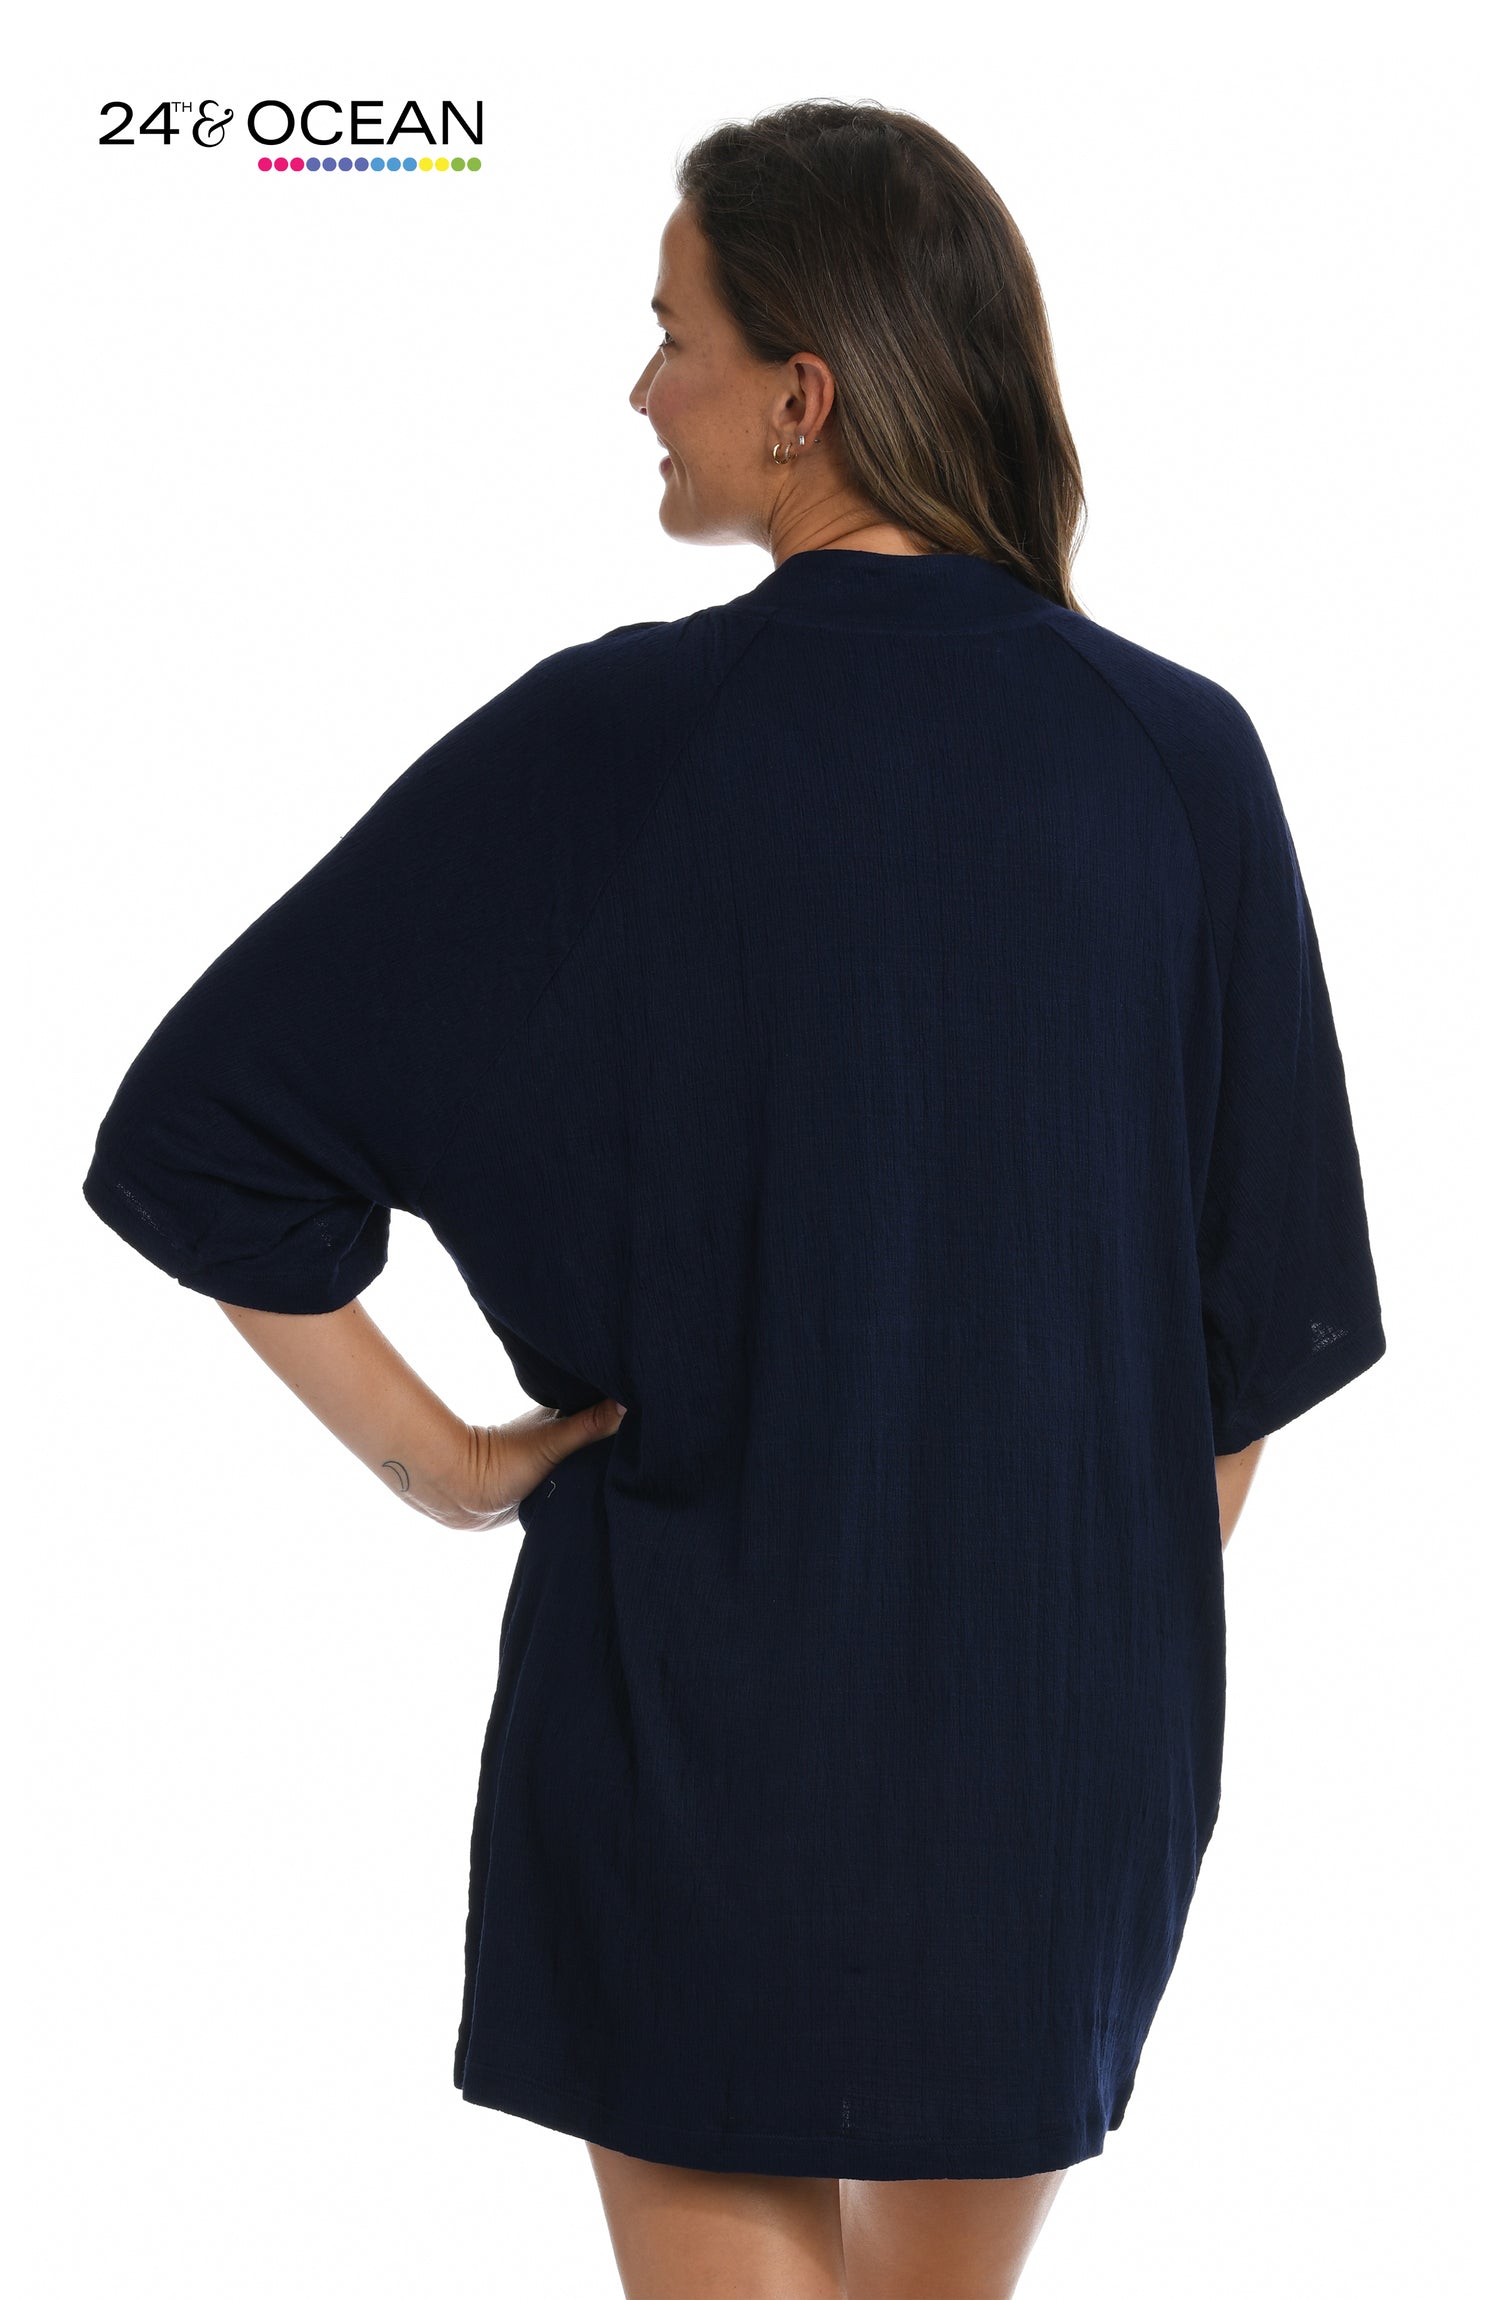 Model is wearing a solid midnight blue colored lace front tunic cover up from our 24th & Ocean brand.